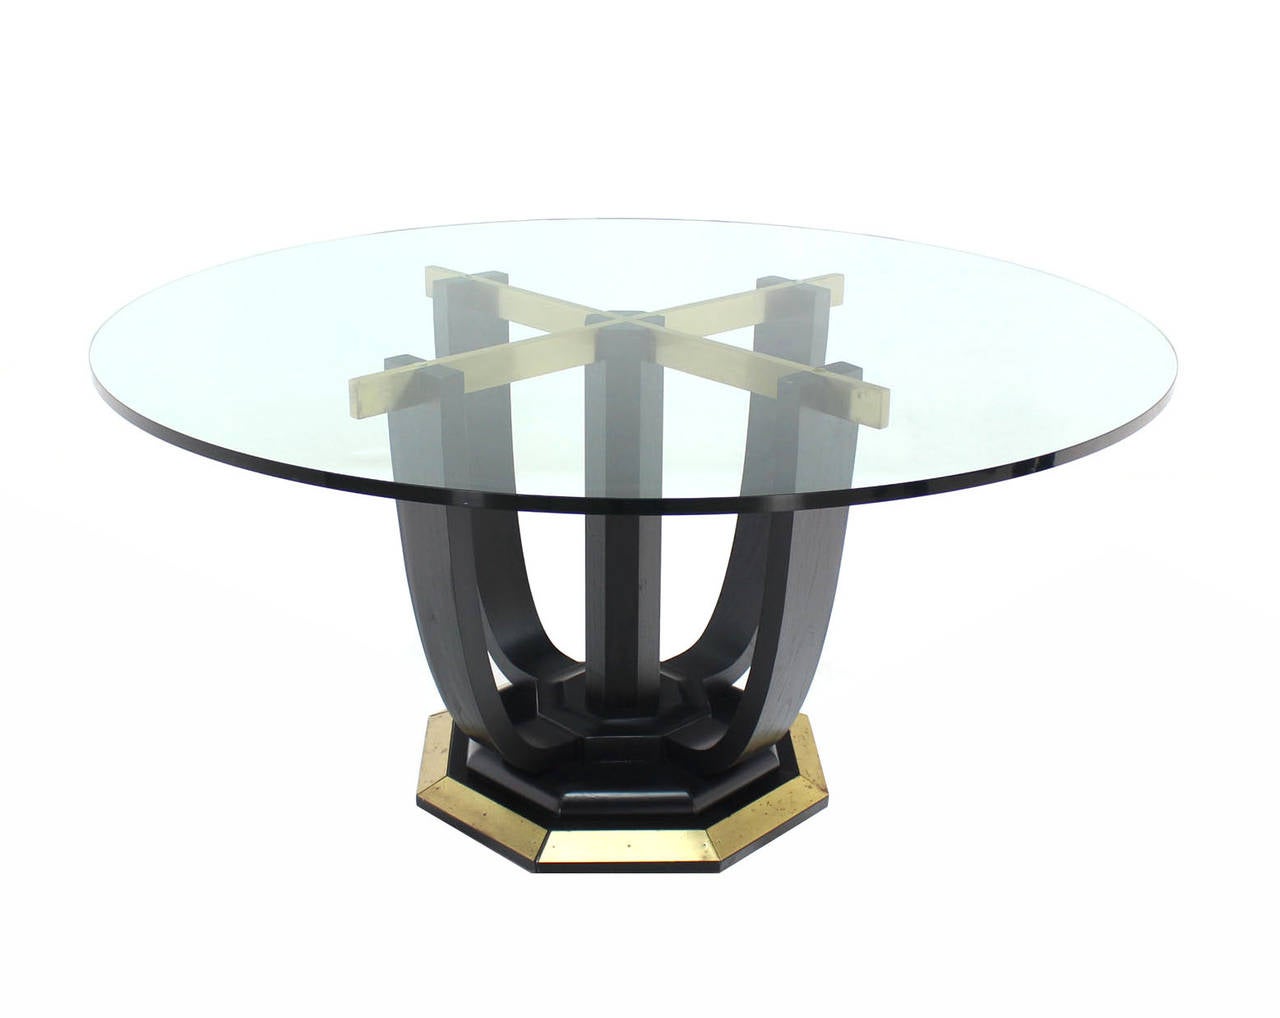 Brass and black lacquered wood-base dining table with 3/4